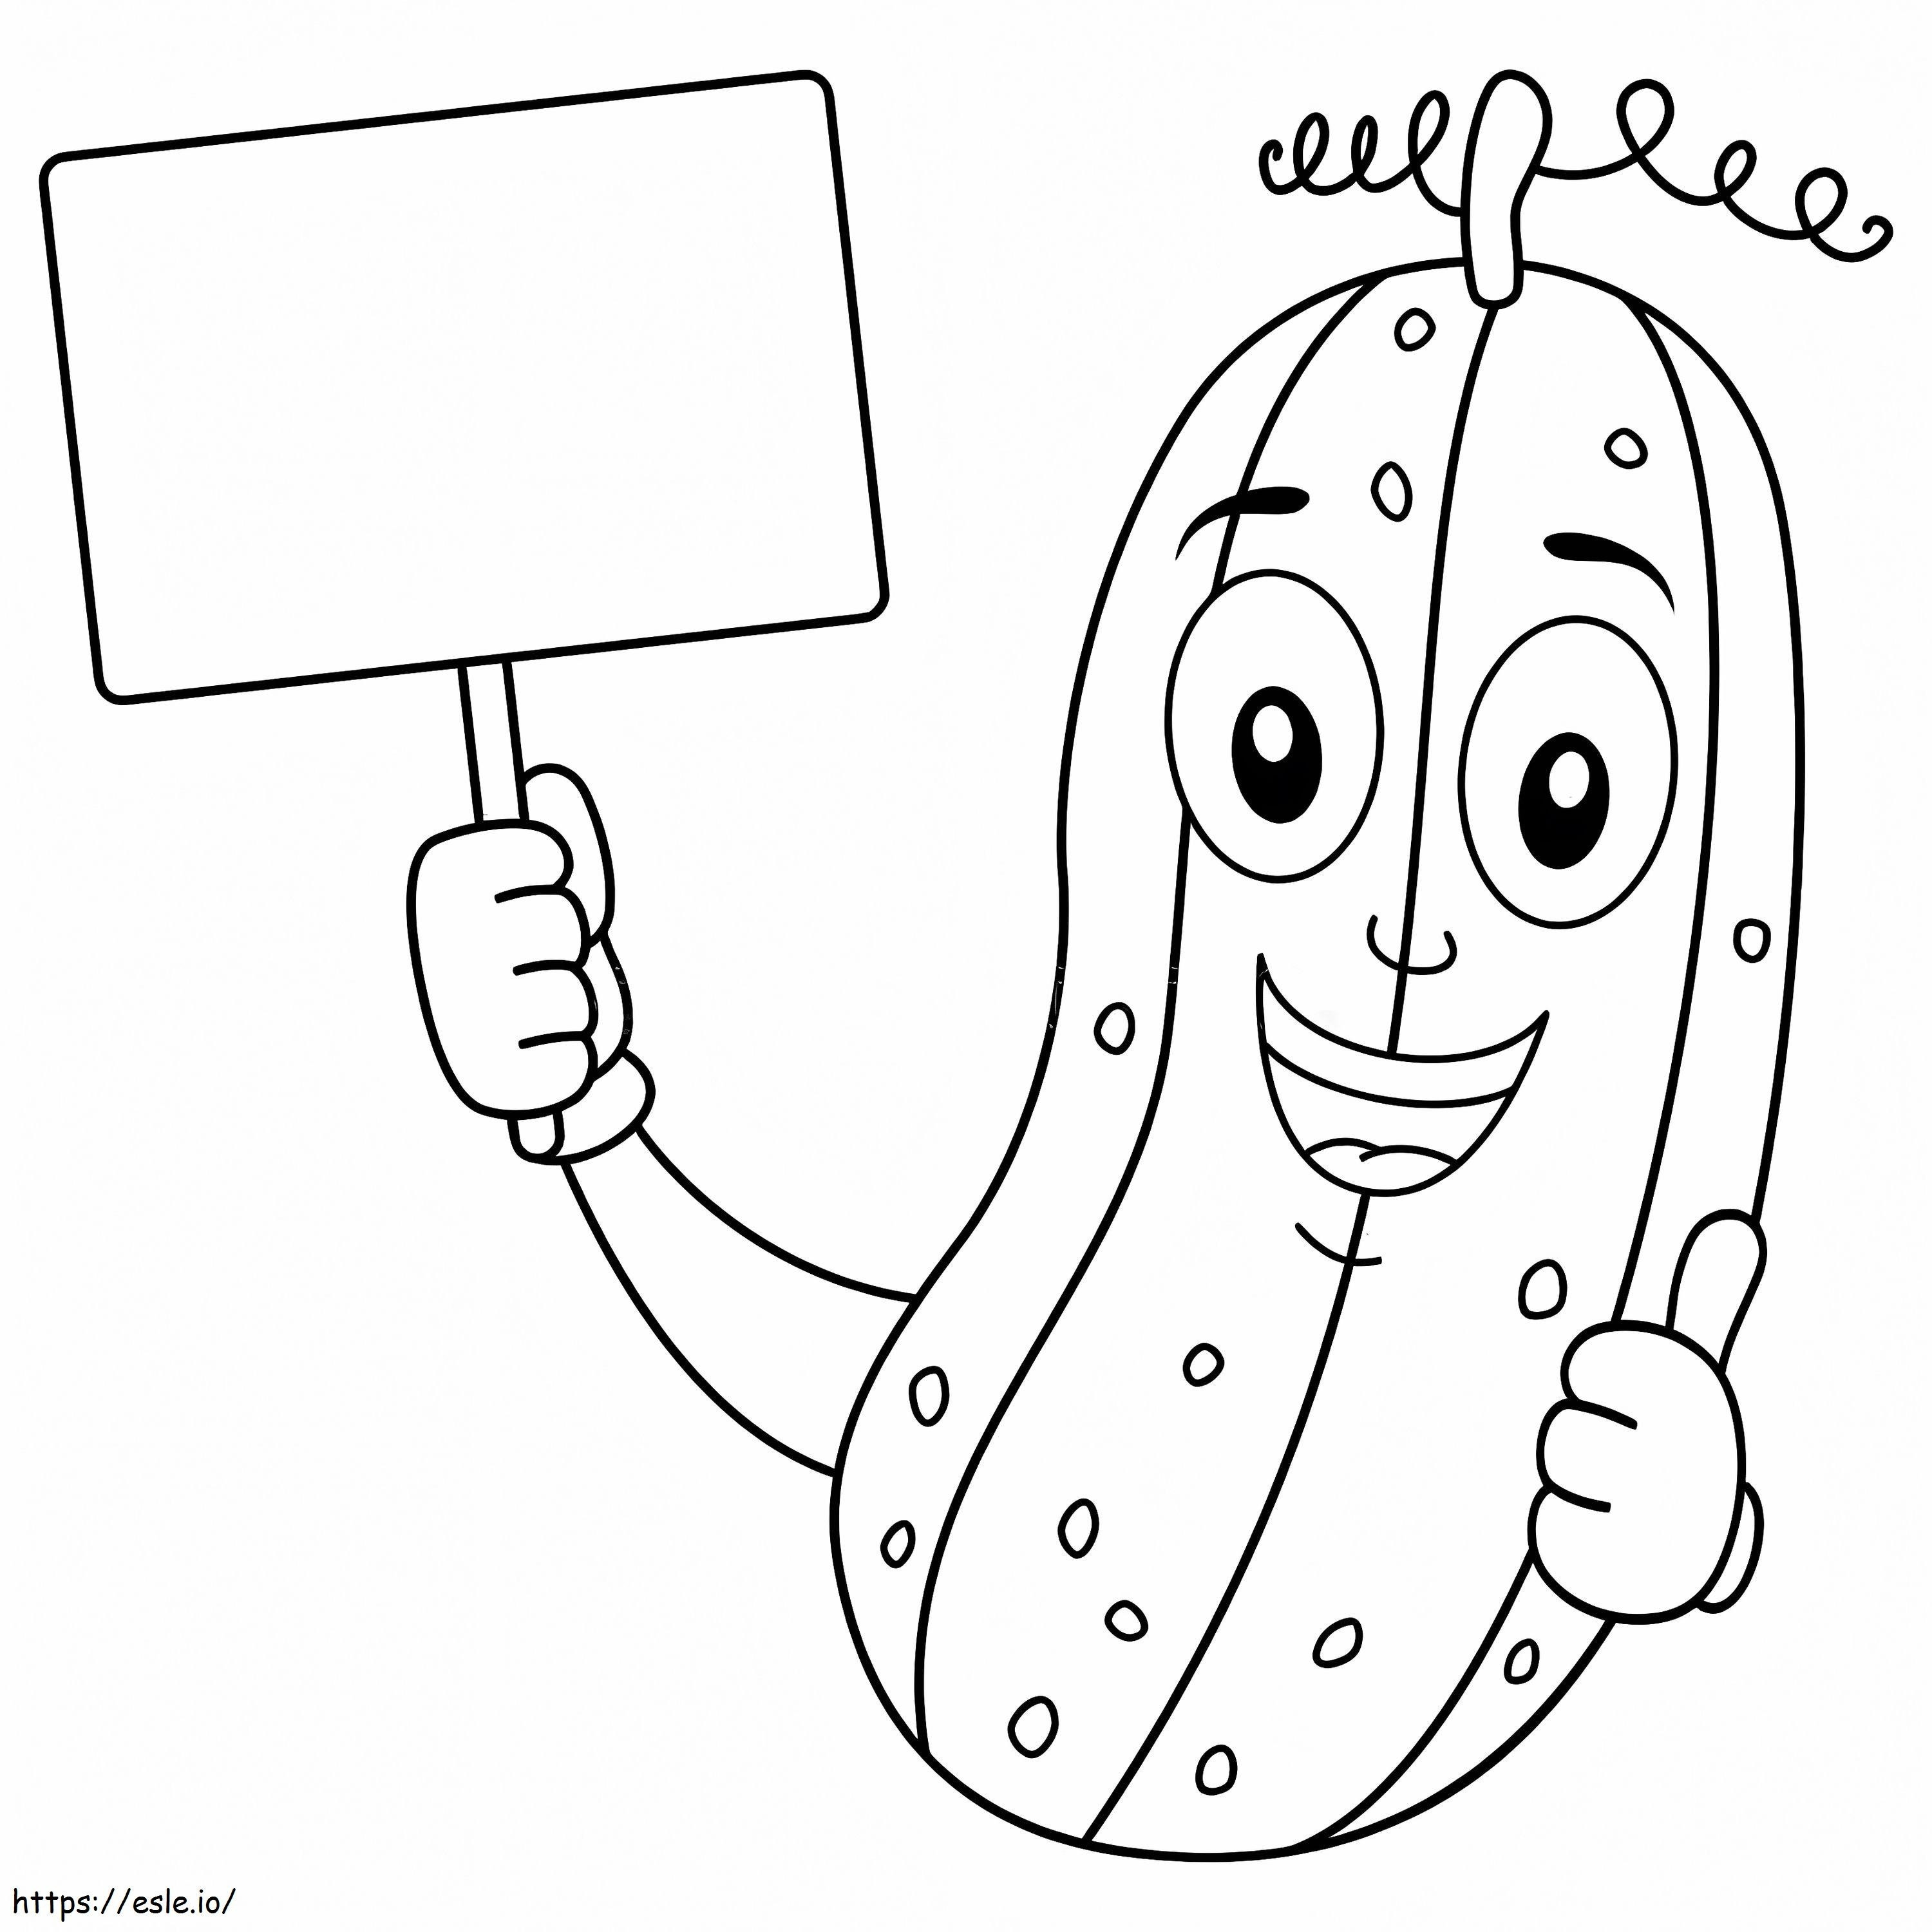 Cucumber Holding A Blackboard coloring page